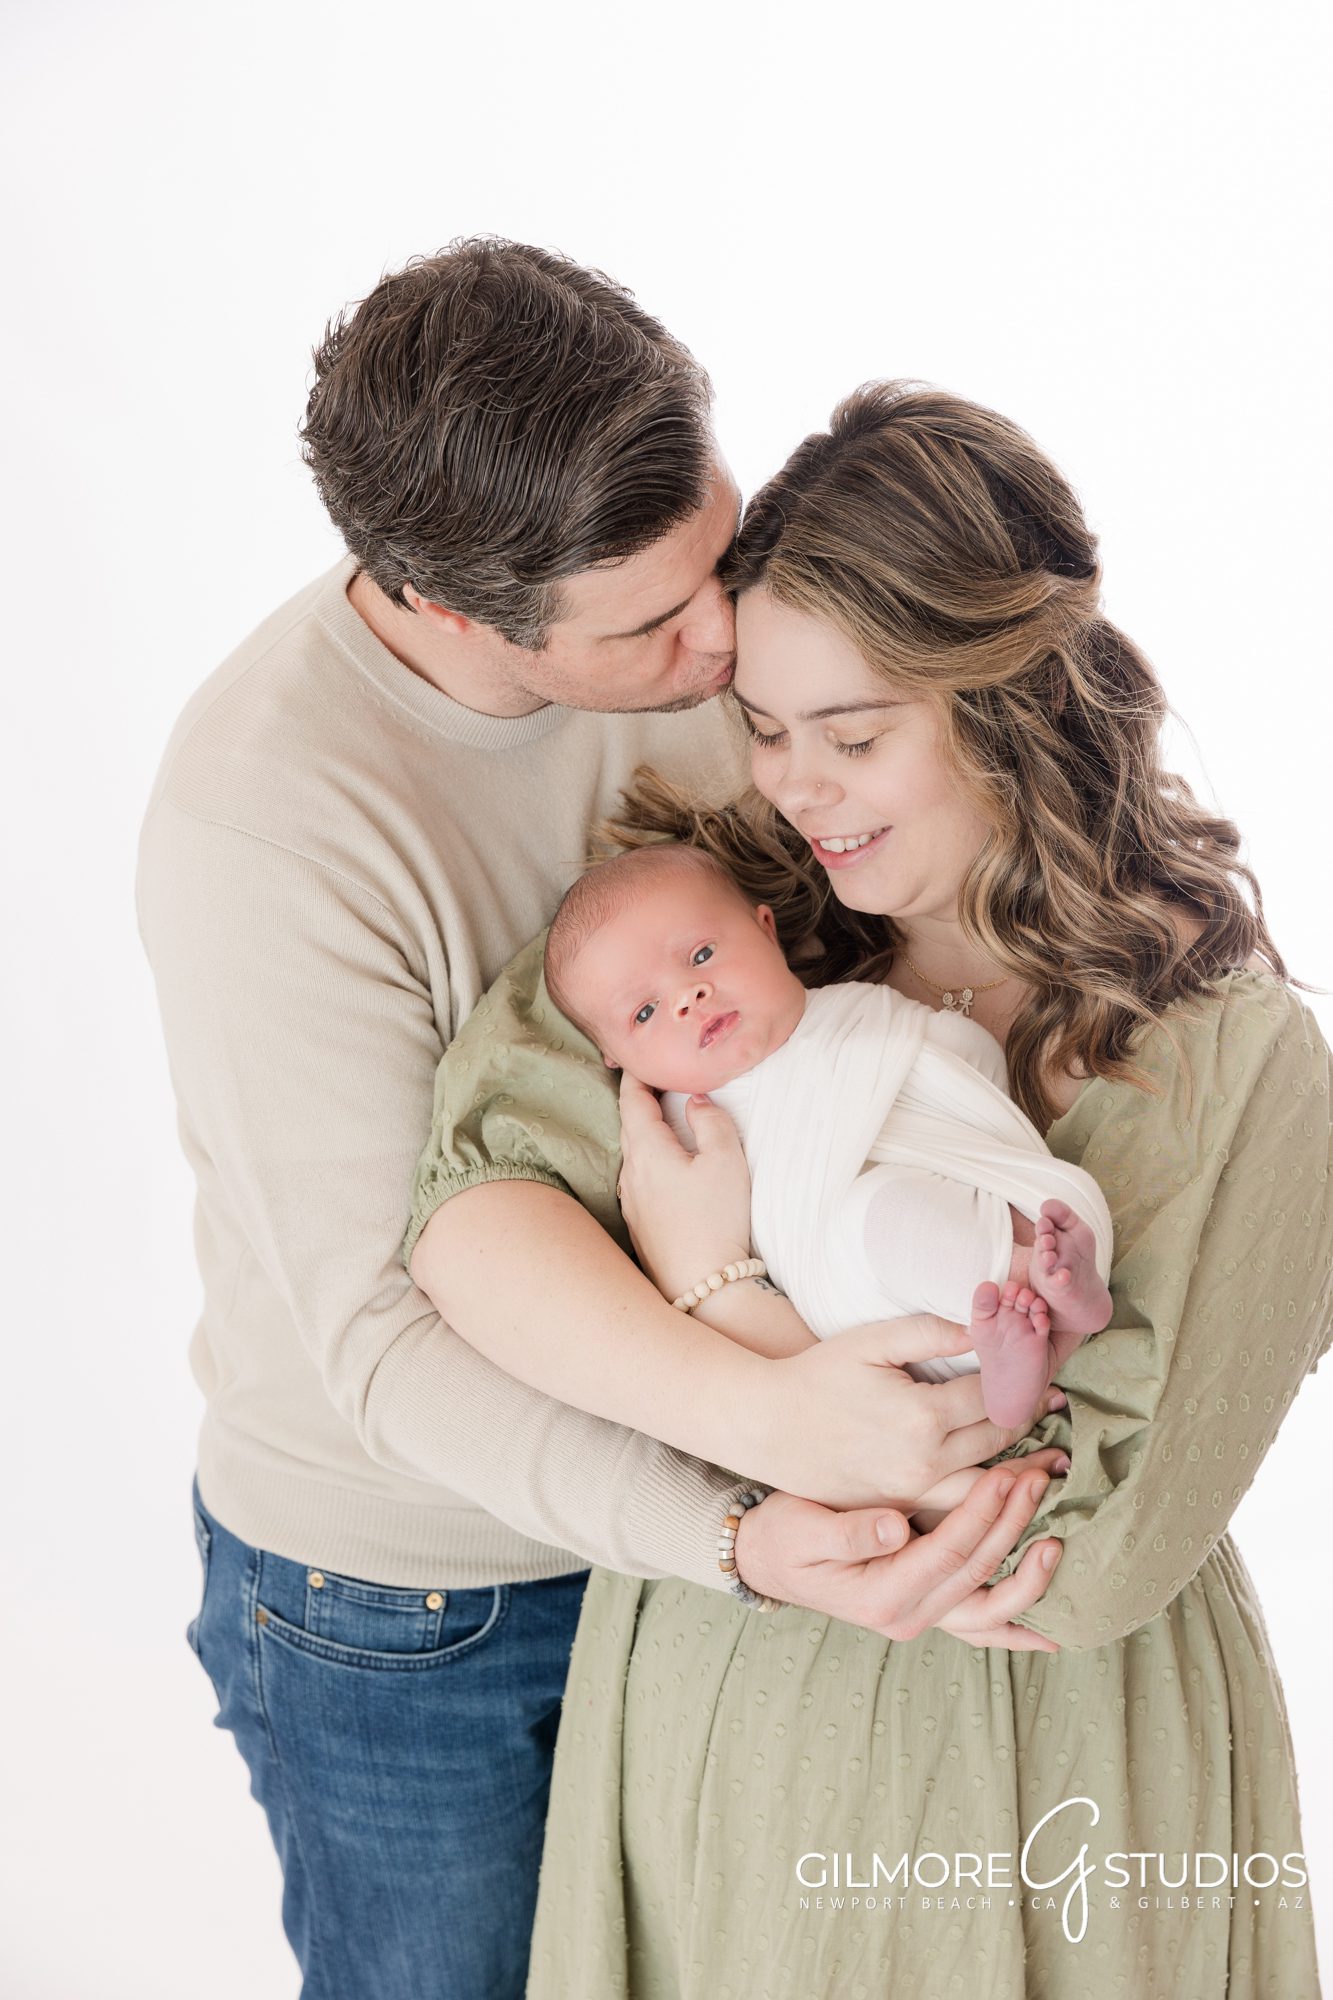 Gilbert Newborn Photographer, family portrait with baby, baby studio in Gilbert, AZ - Chandler, Queen Creek, Scottsdale, Professional Newborn Photography Studio, family session with toddler and newborn baby boy, mother and father holding baby